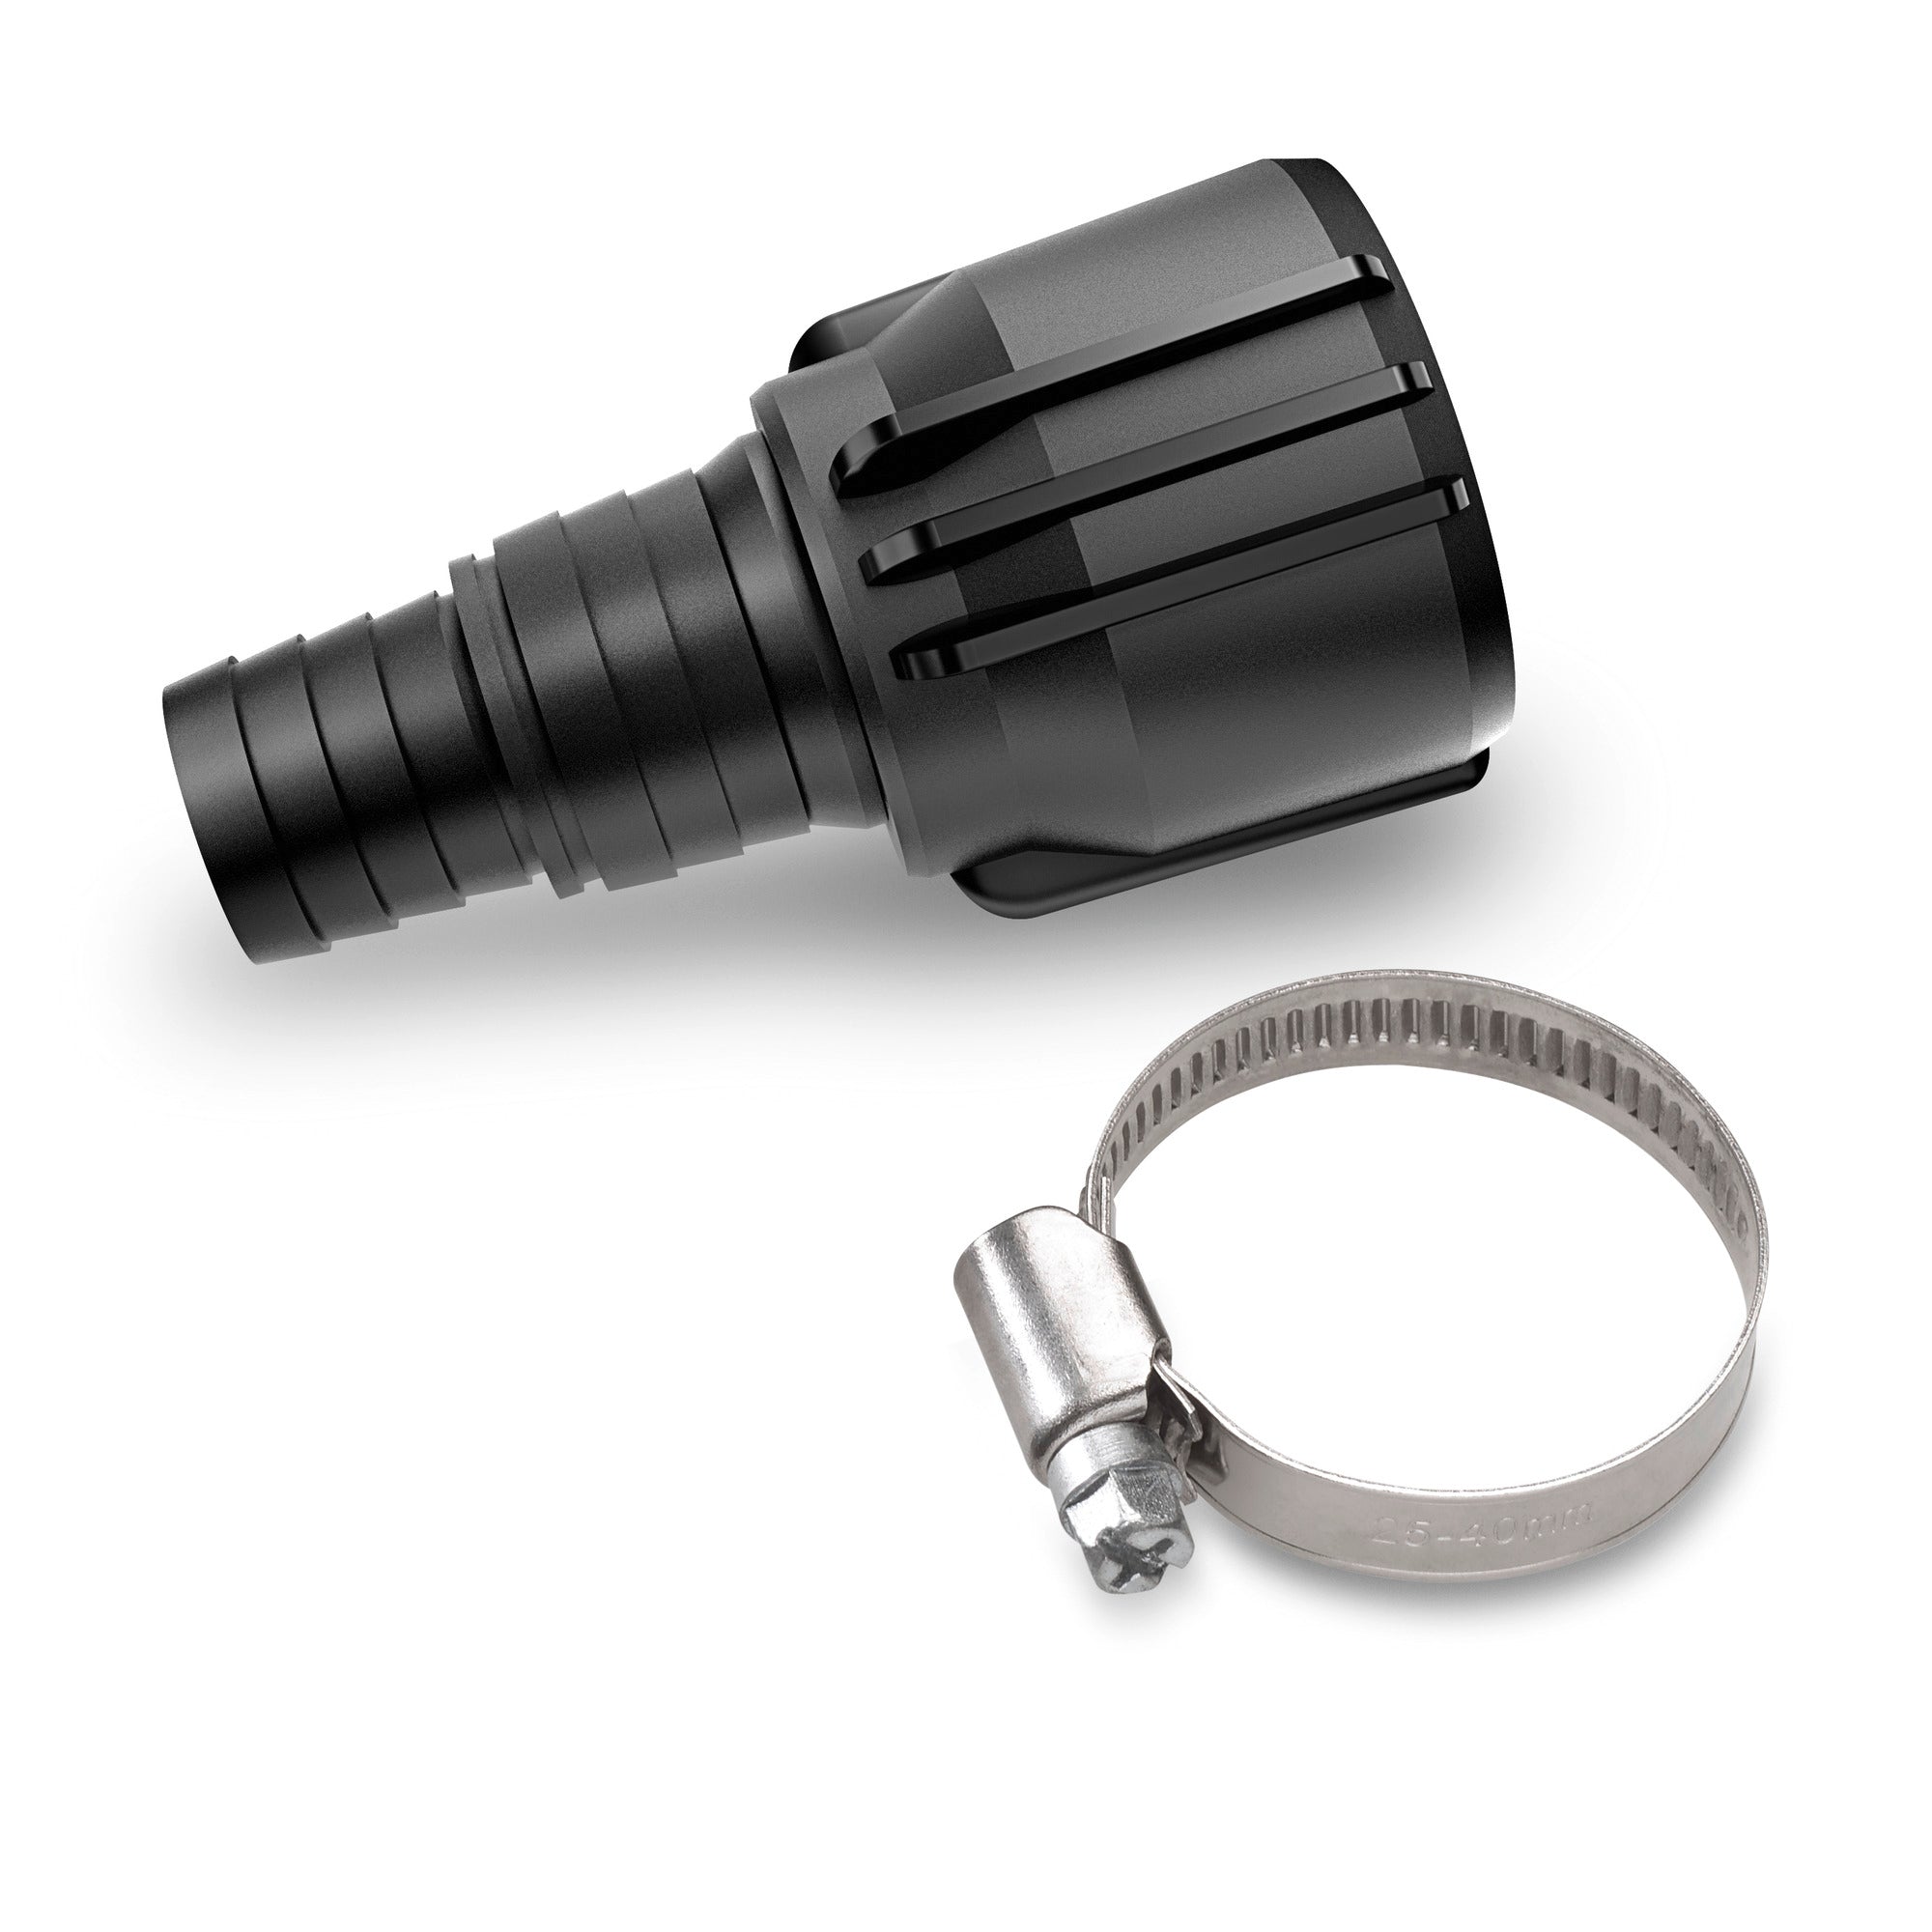 Kärcher connector for suction and garden hose